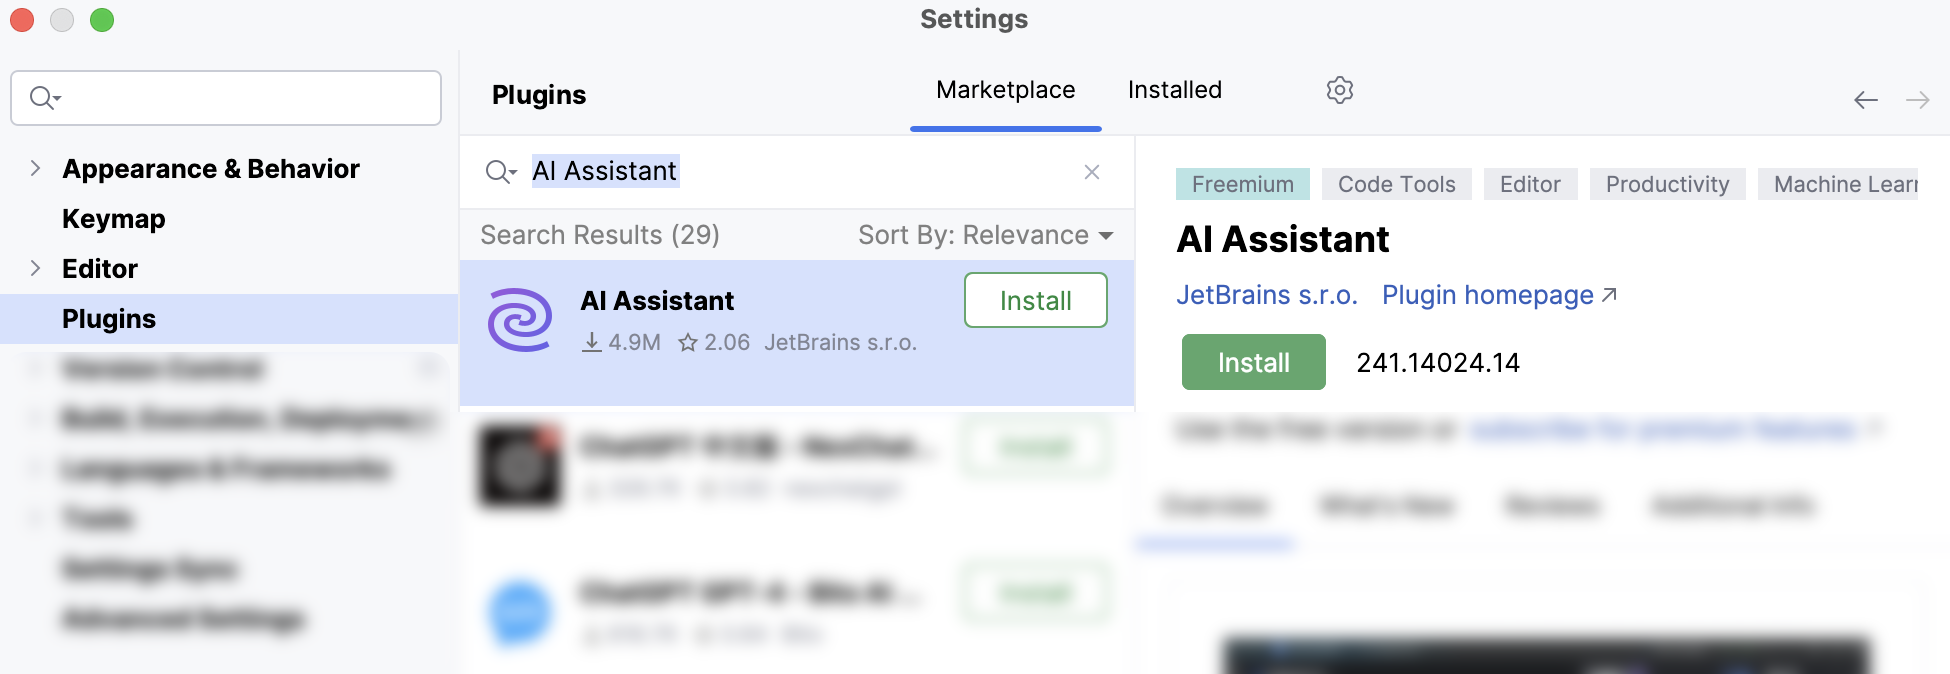 AI Assistant in the list of available plugins in the marketplace